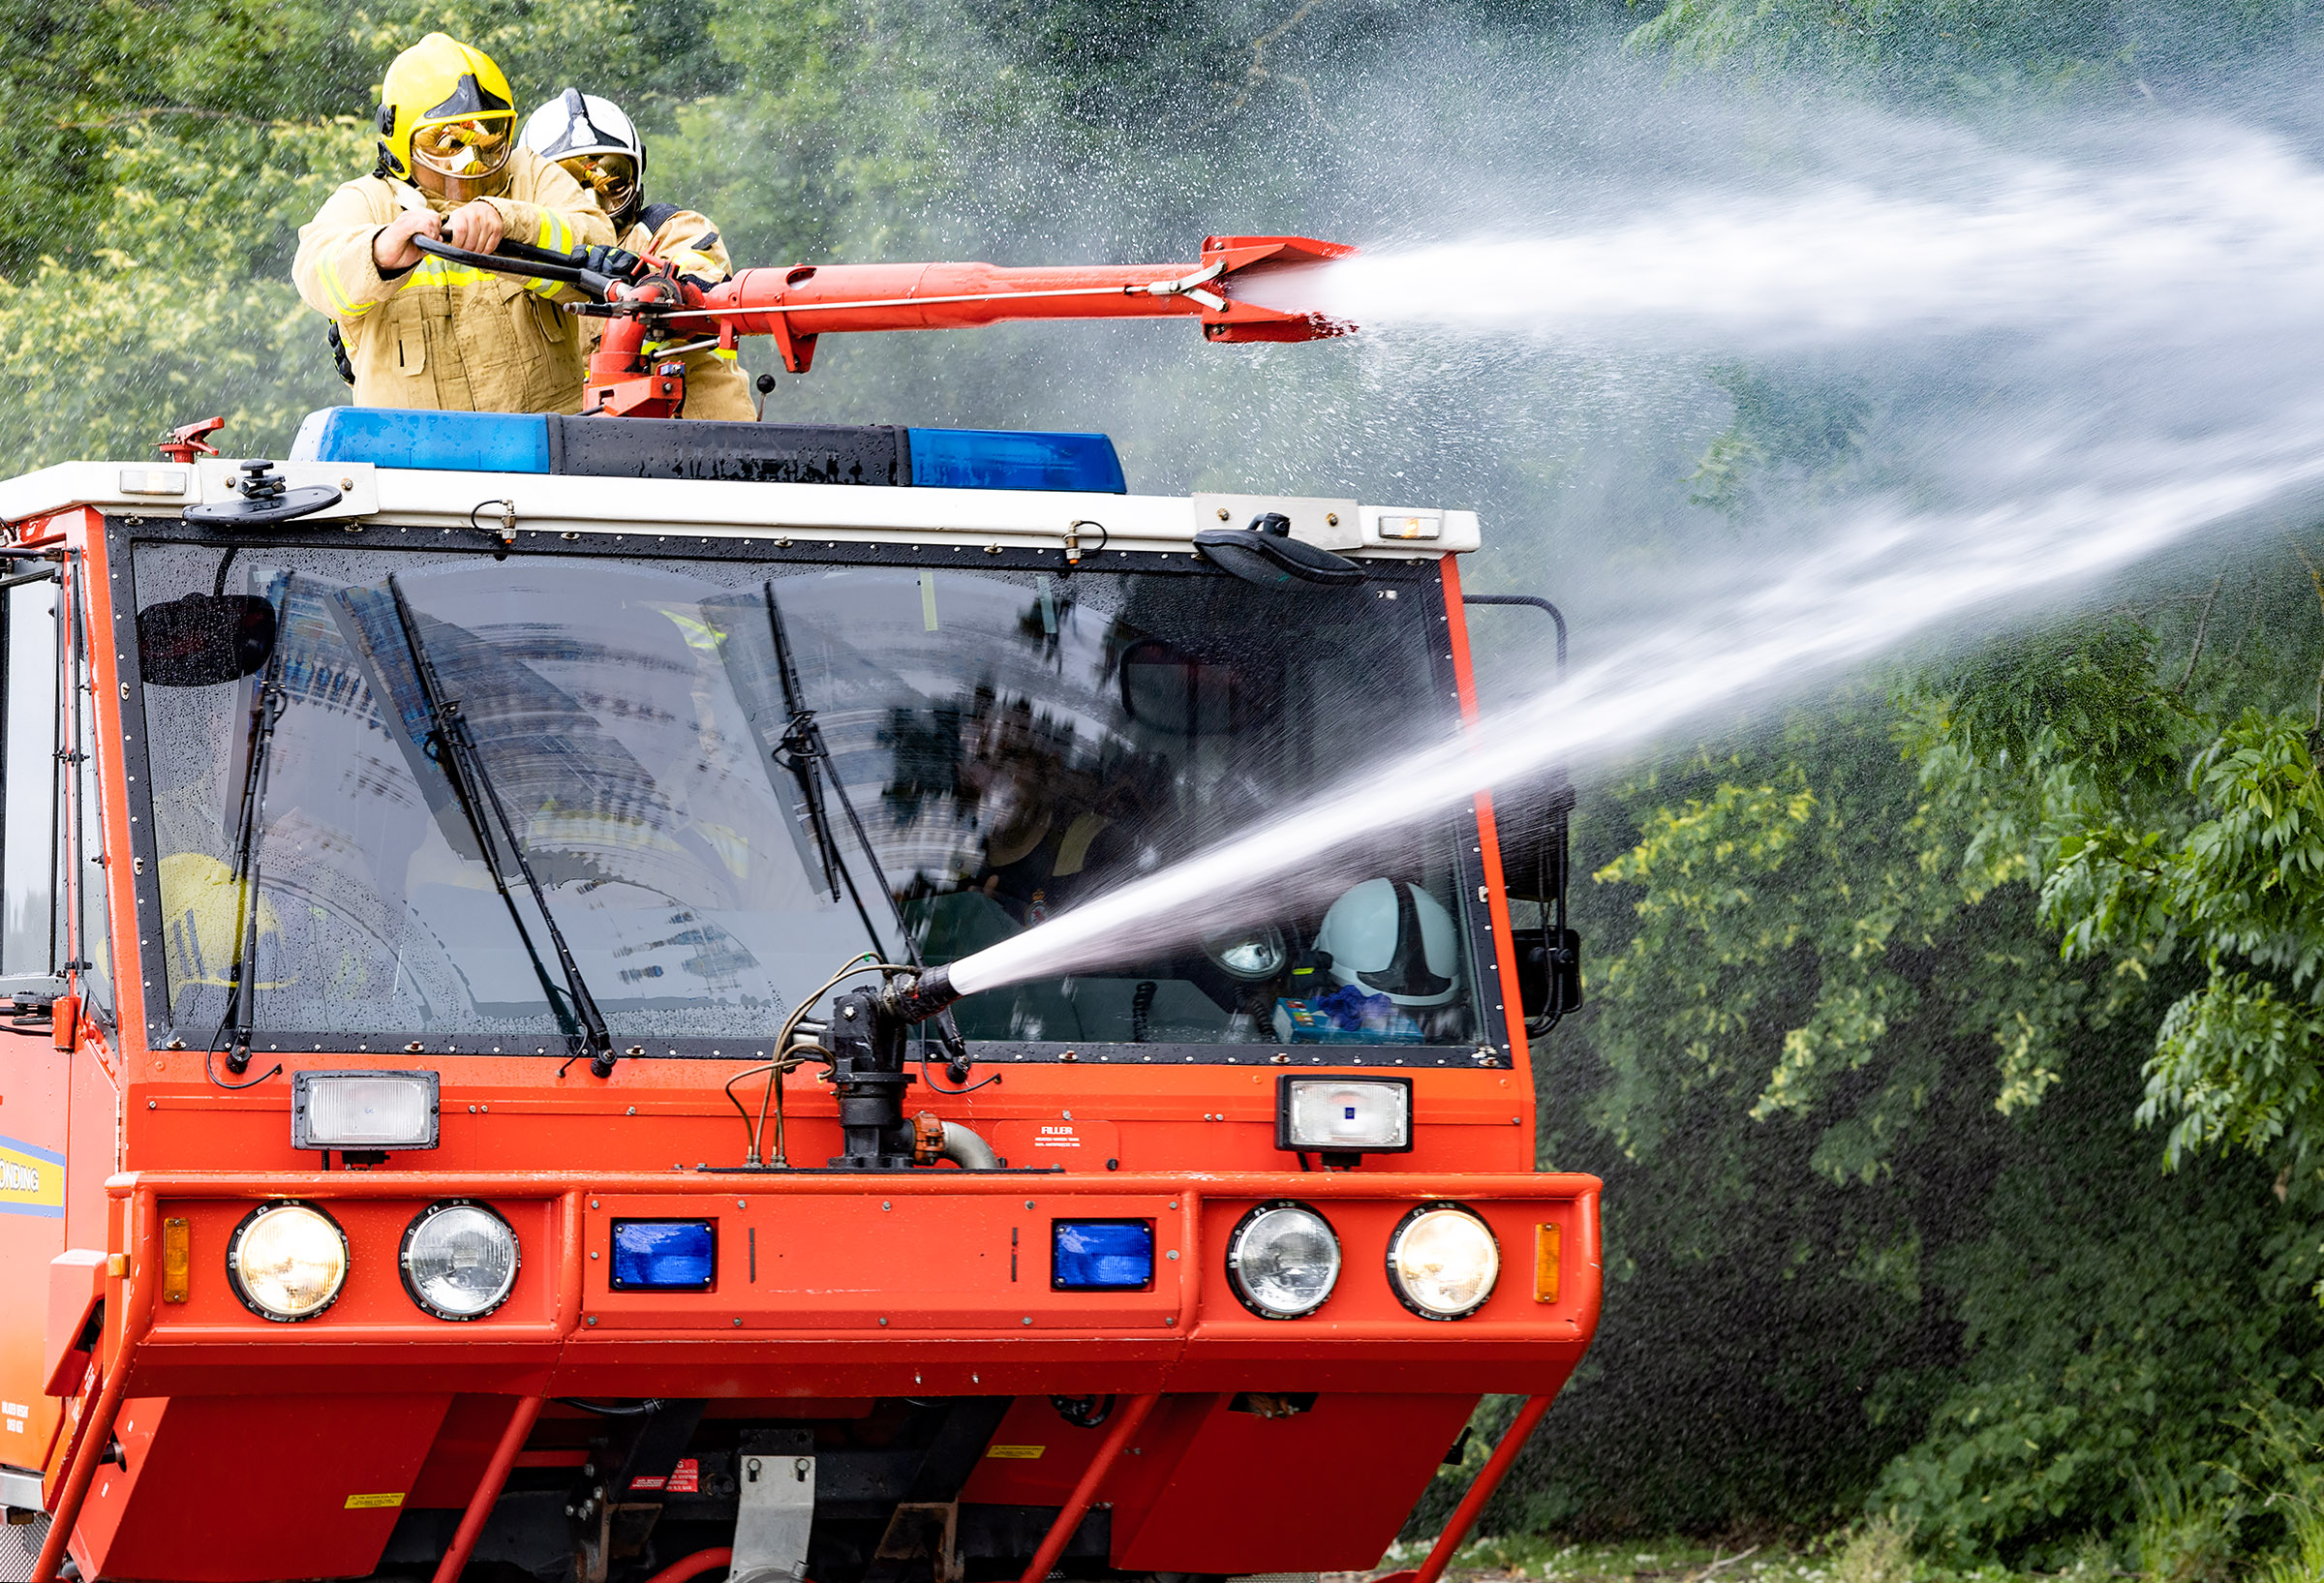 Firefighters operating the specialised fire engine